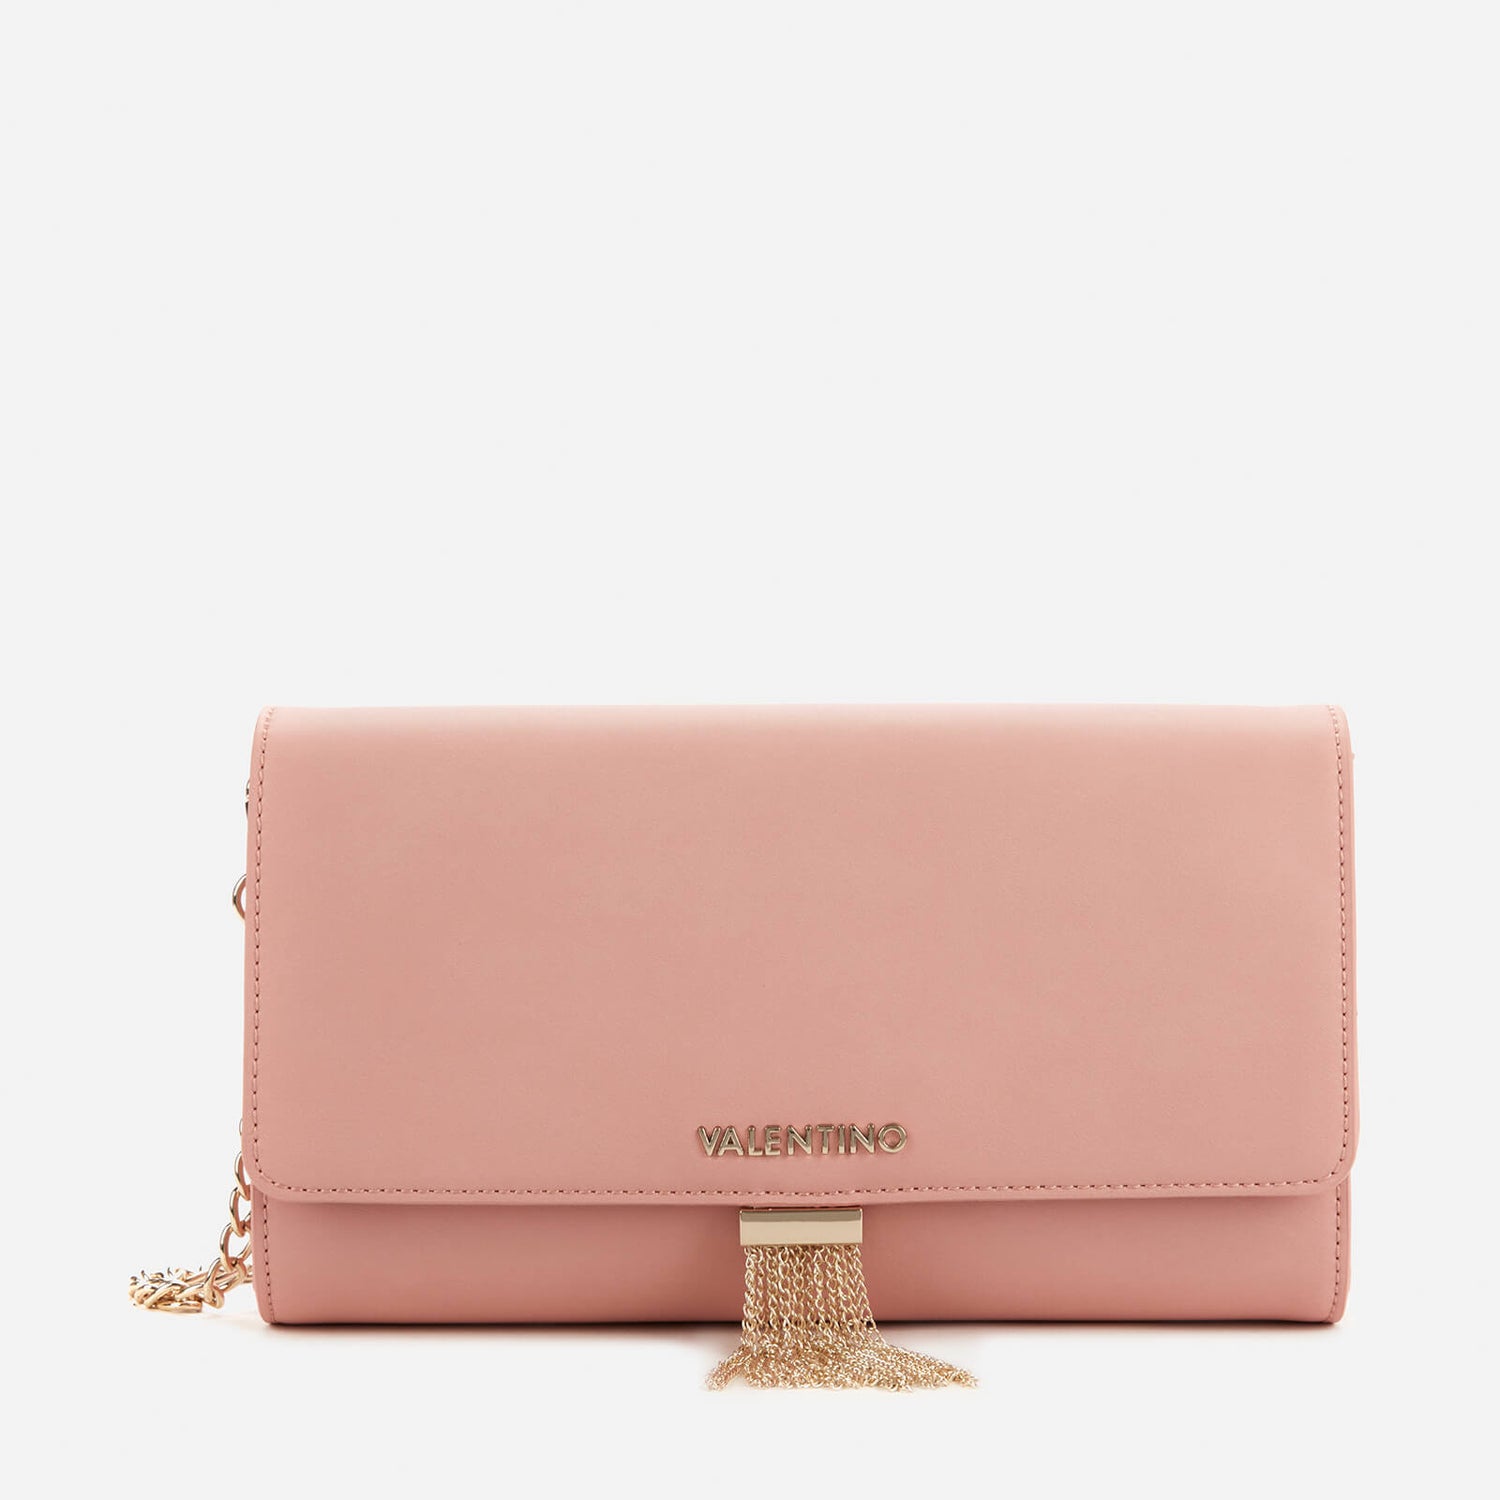 Valentino Bags Women's Piccadilly Large Shoulder Bag - Pink | TheHut.com